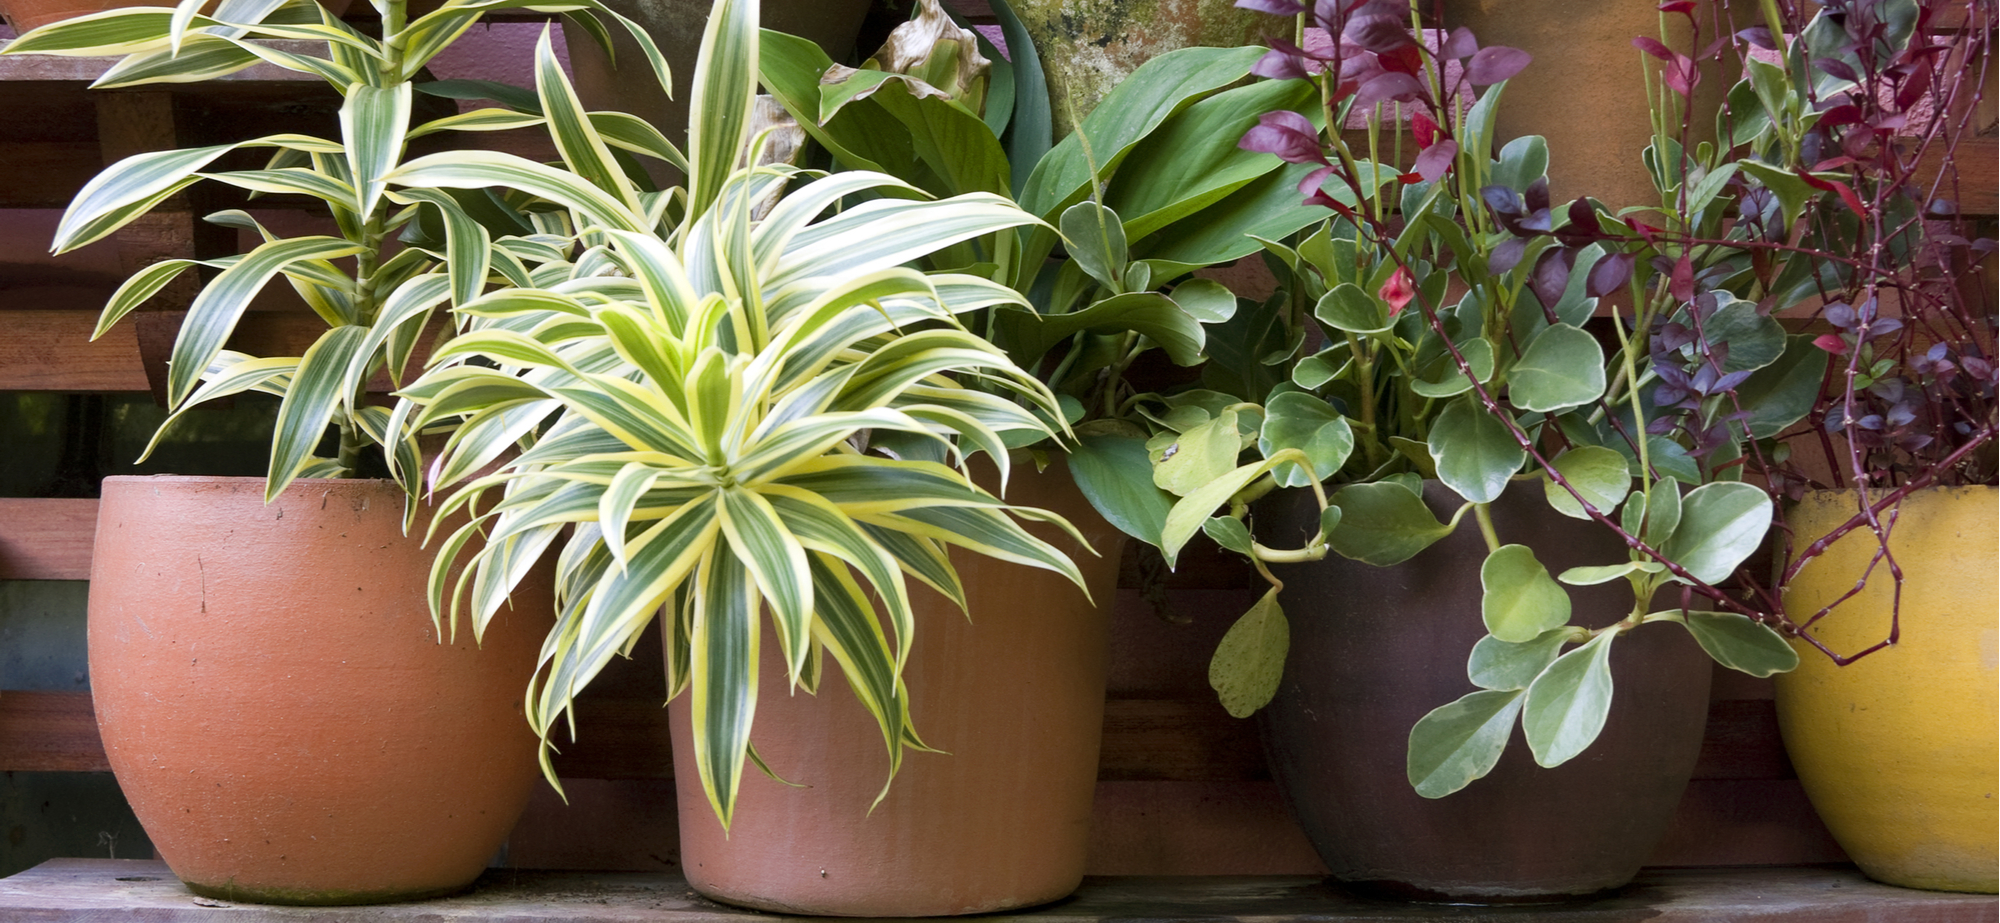 Try Landscaping with Potted Plants This Year